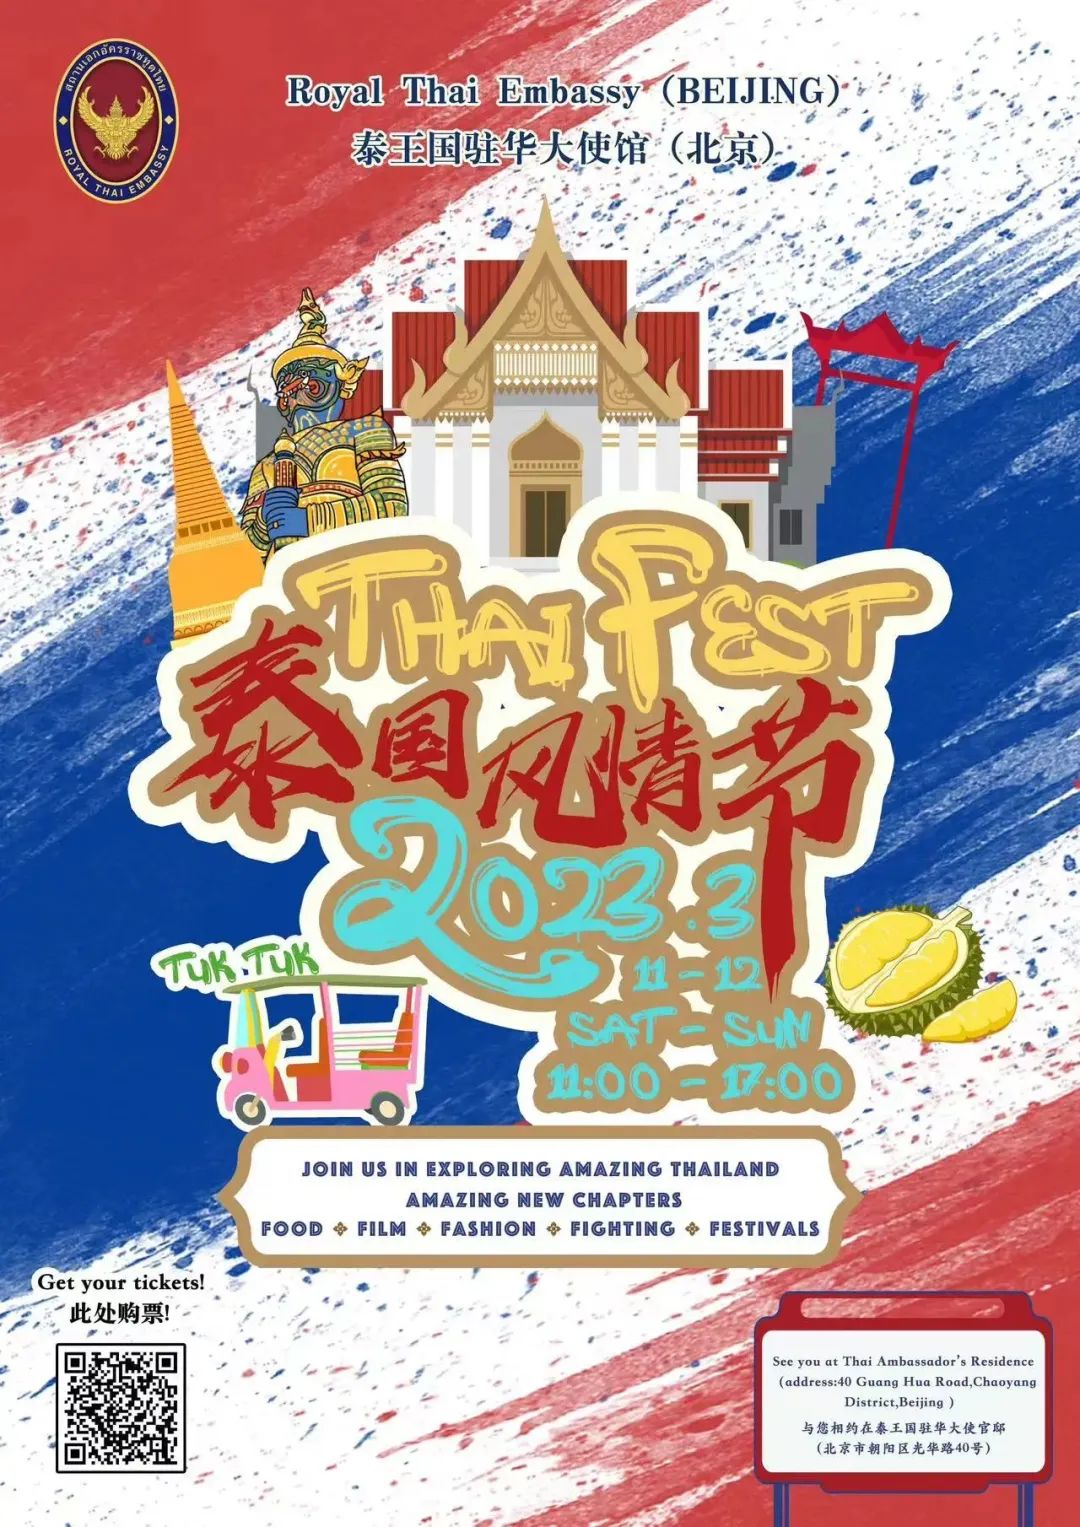 Promotion material for 2023 Thai festival  Photo: Courtesy of Embassy of Thailand in China